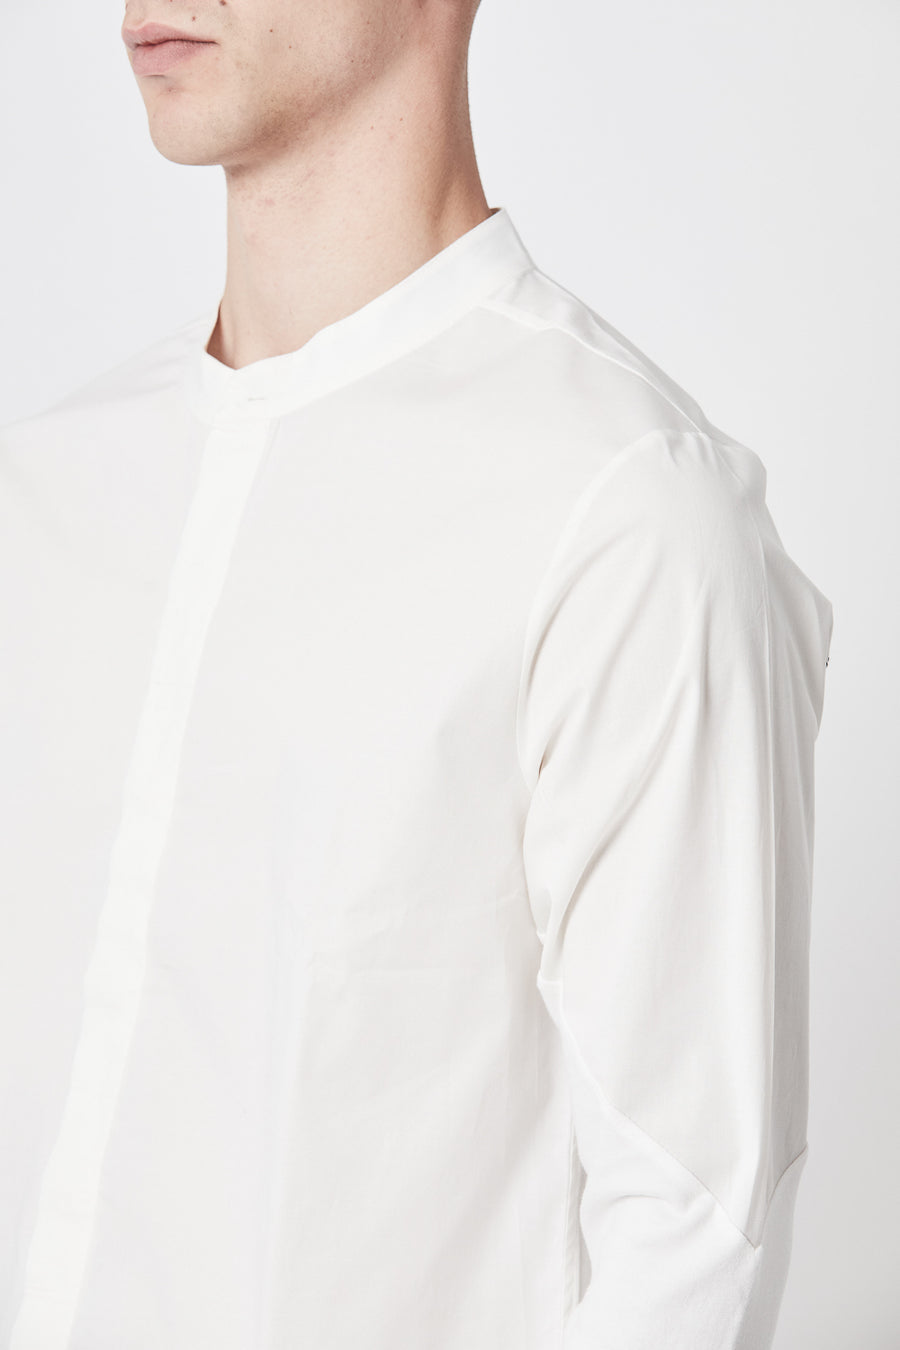 Buy the Thom Krom M H 135 Shirt in Off White at Intro. Spend £50 for free UK delivery. Official stockists. We ship worldwide.